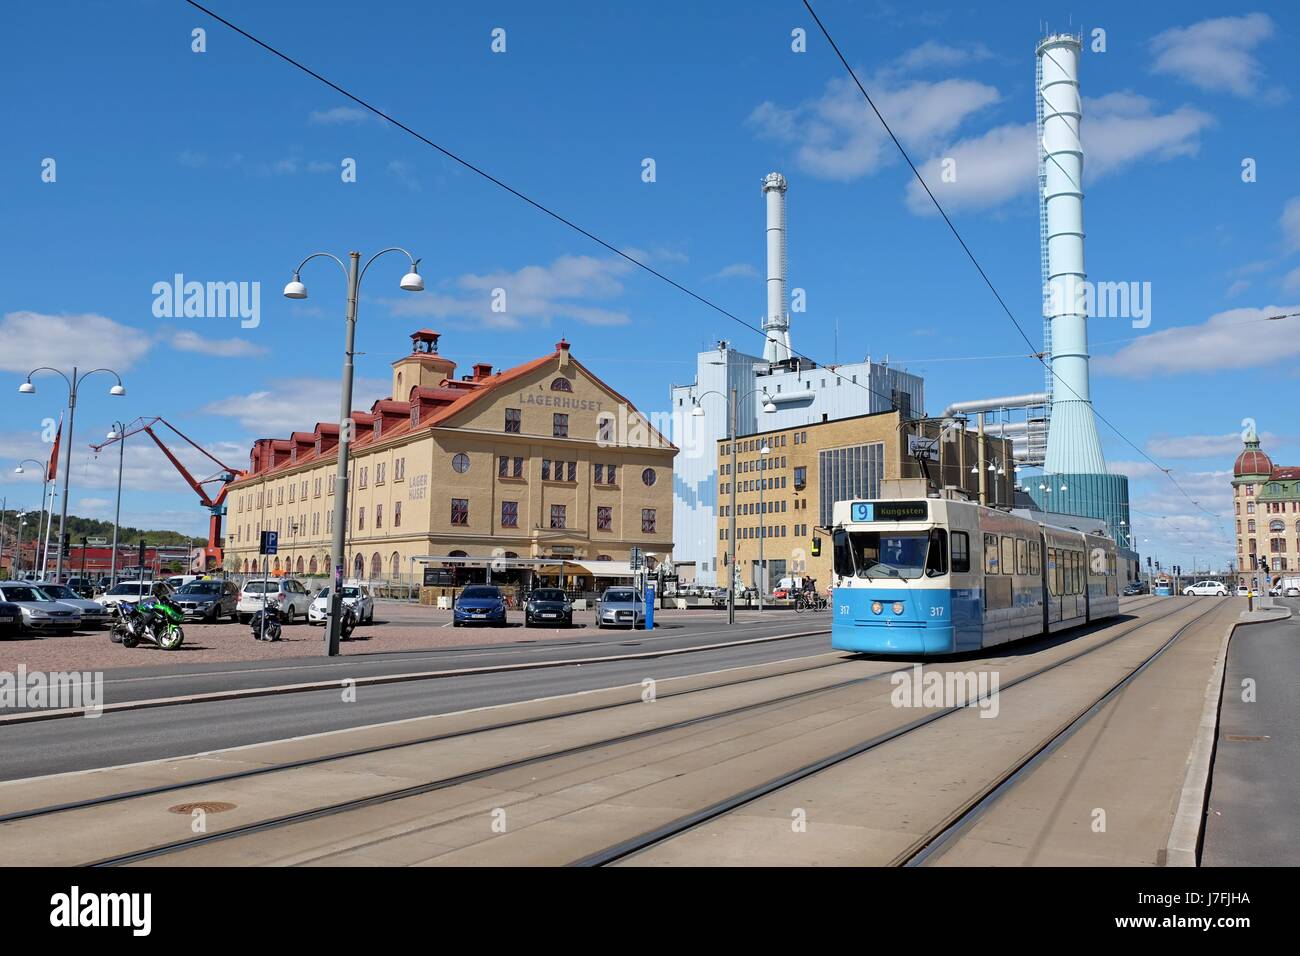 Gothenburg, Sweden - May, 2017: Tram on a street and tubes of Goteborg Energi building (generating energy from waste material)  of Gothenburg, Sweden. Stock Photo